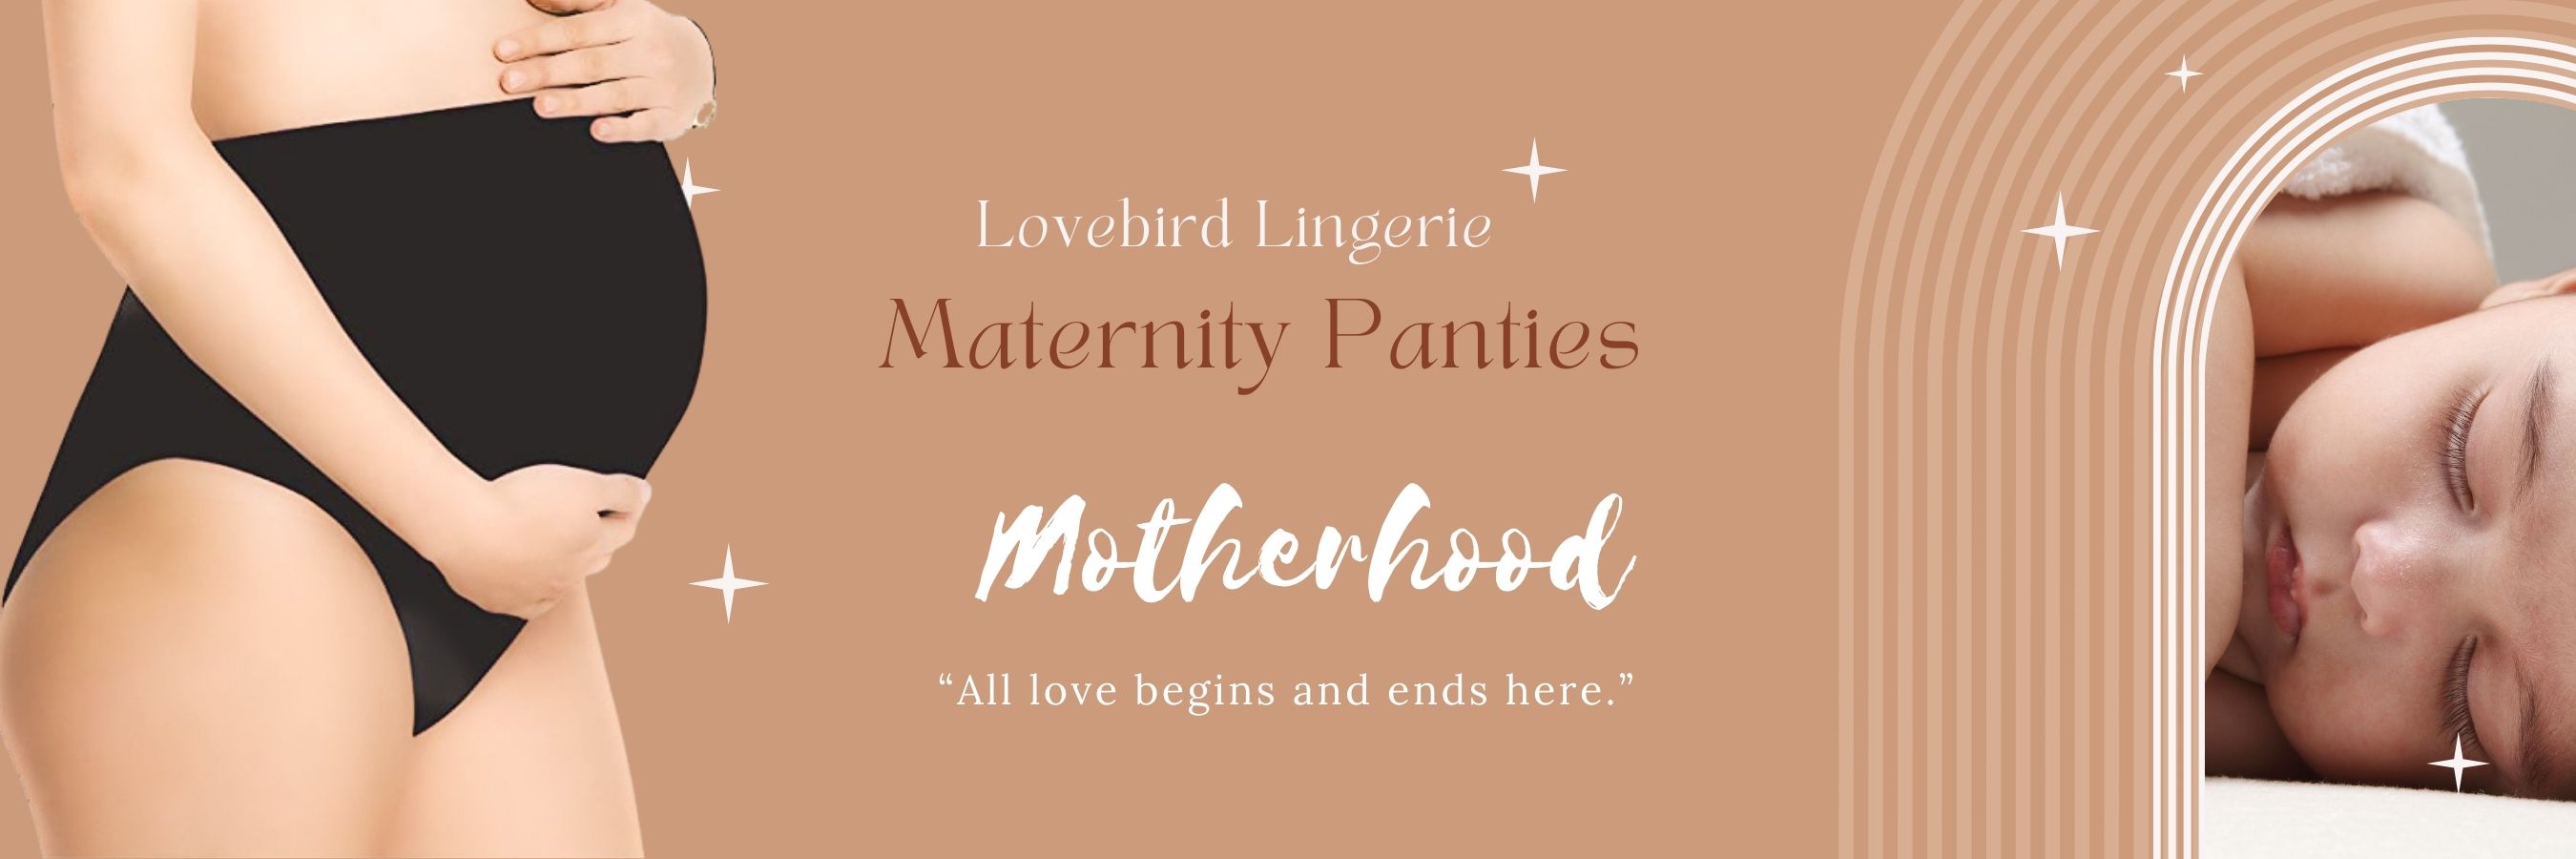 Maternity Panty is designed To banner lovebird